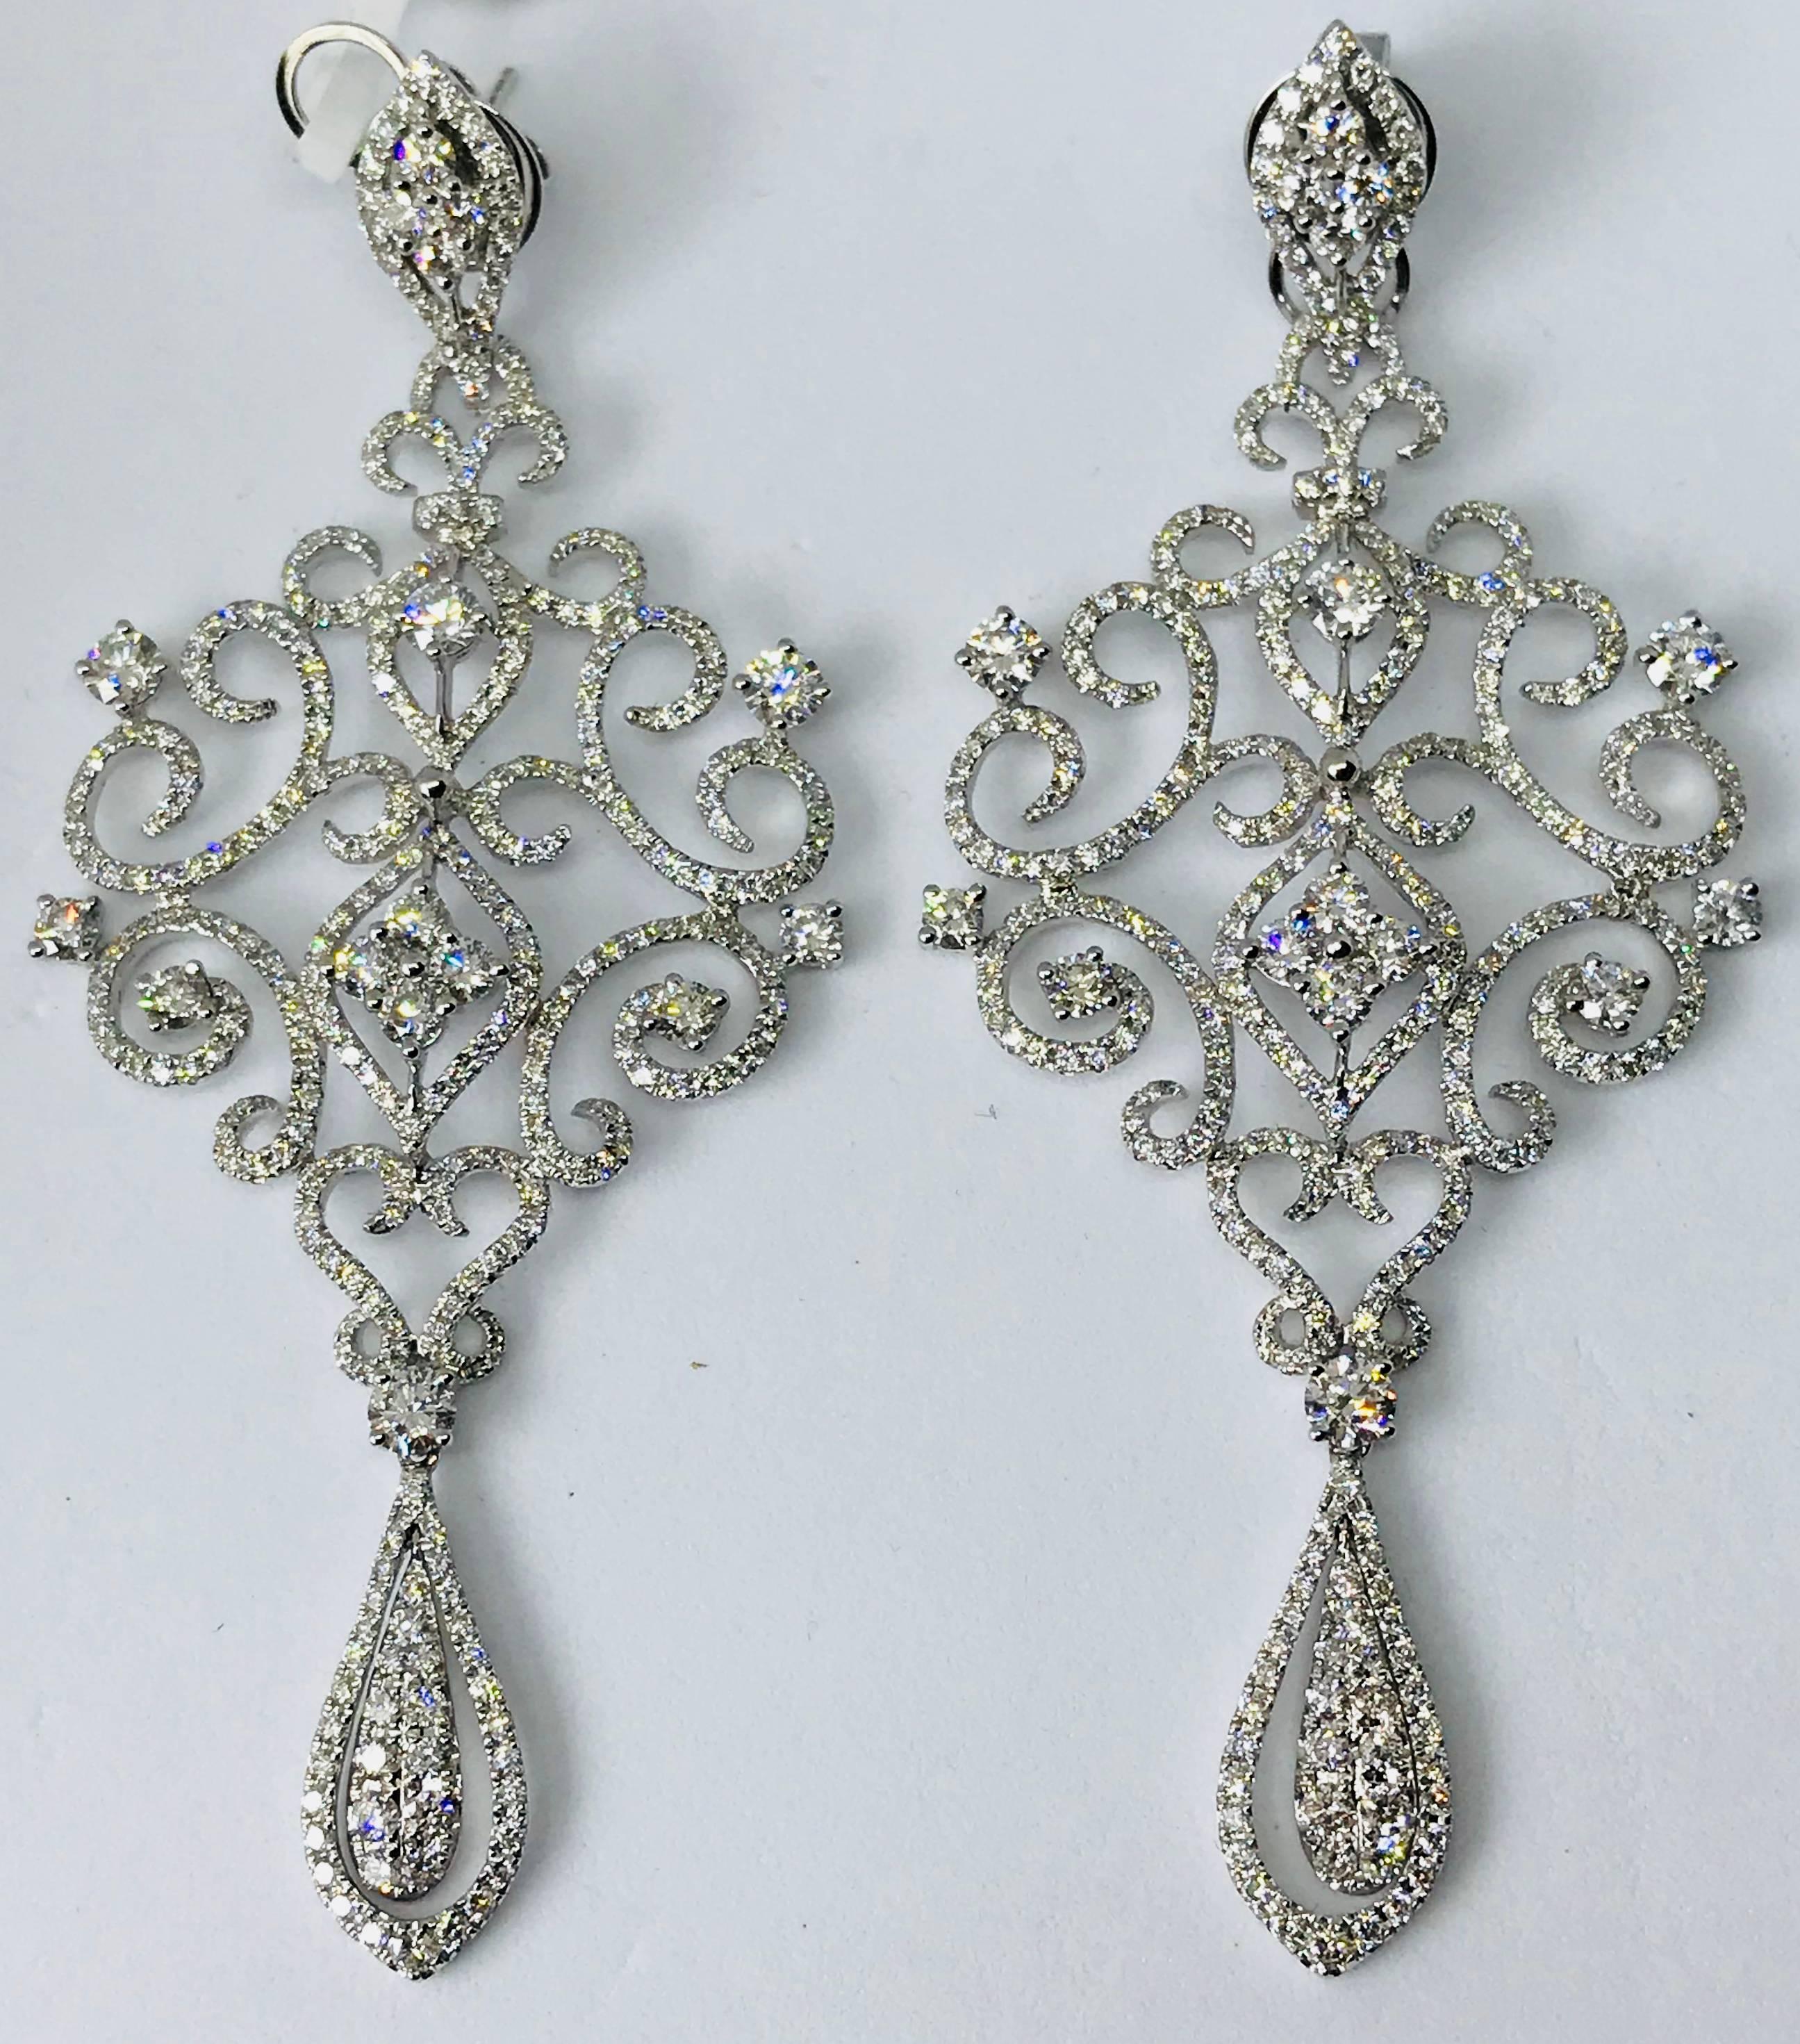 Finest and Most exclusive Diamond earring most amazing design and workmanship for most elegant women or pretty girl .
designed by best designer in 18k gold 2.68 grams
Vs F Color Diamonds 606 diamonds total 3.56 carats
32 Diamonds 2.68 carats.